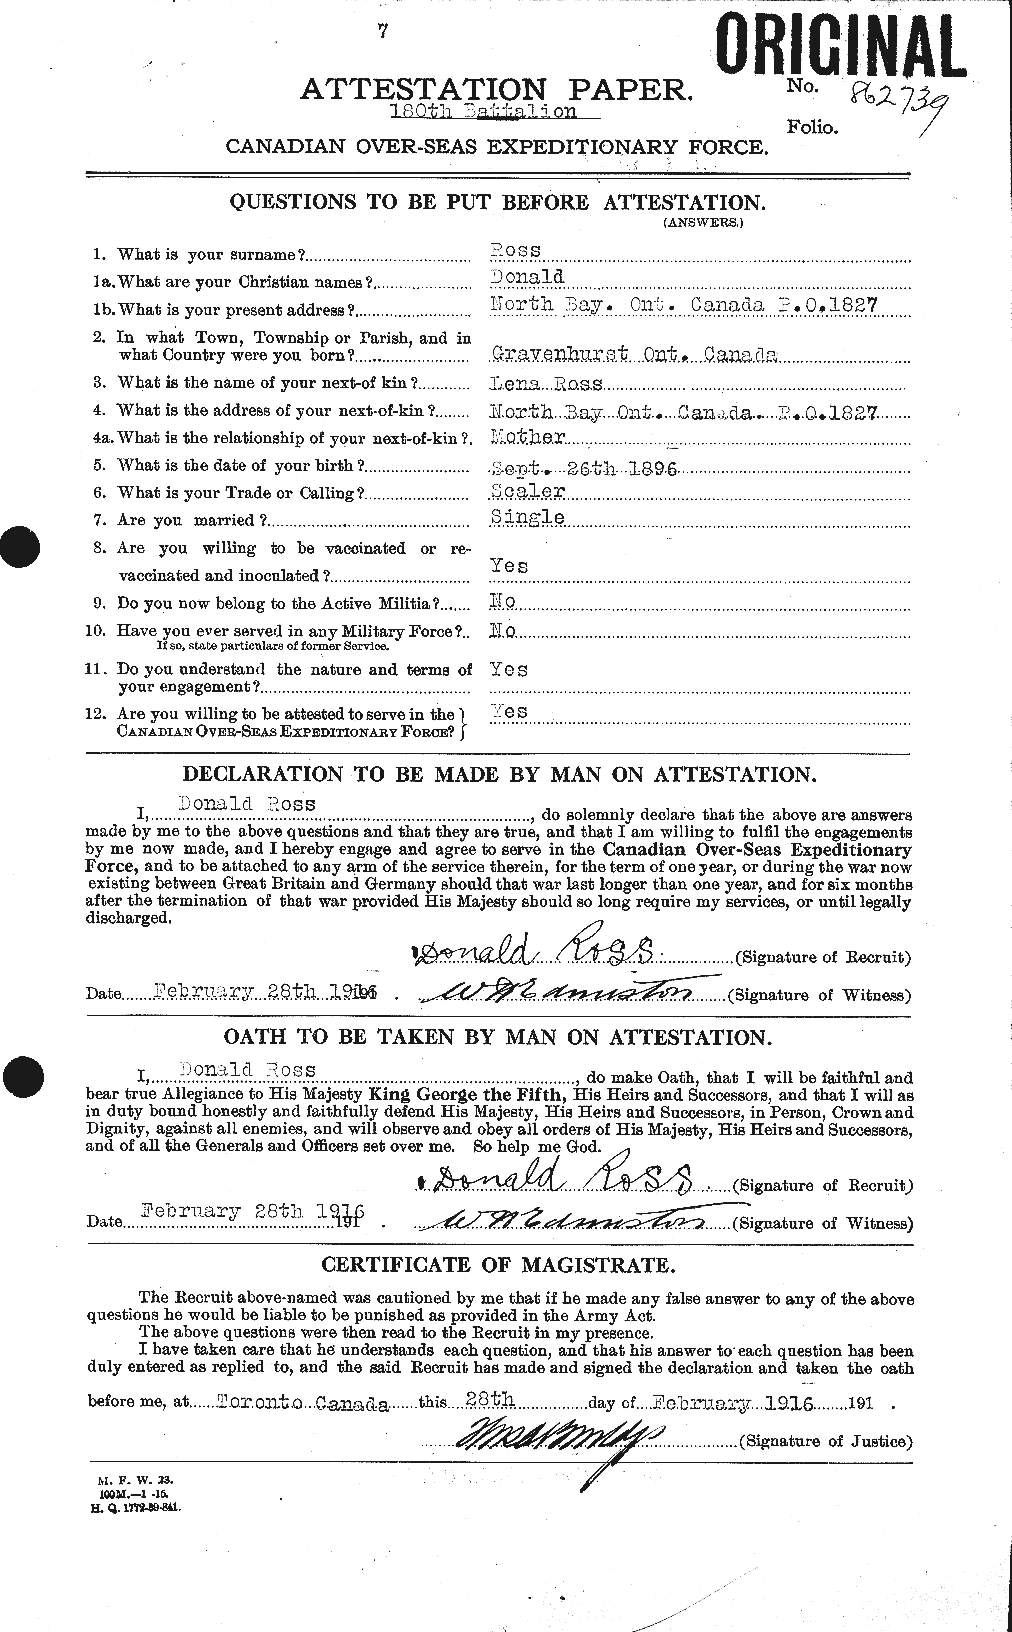 Personnel Records of the First World War - CEF 612861a